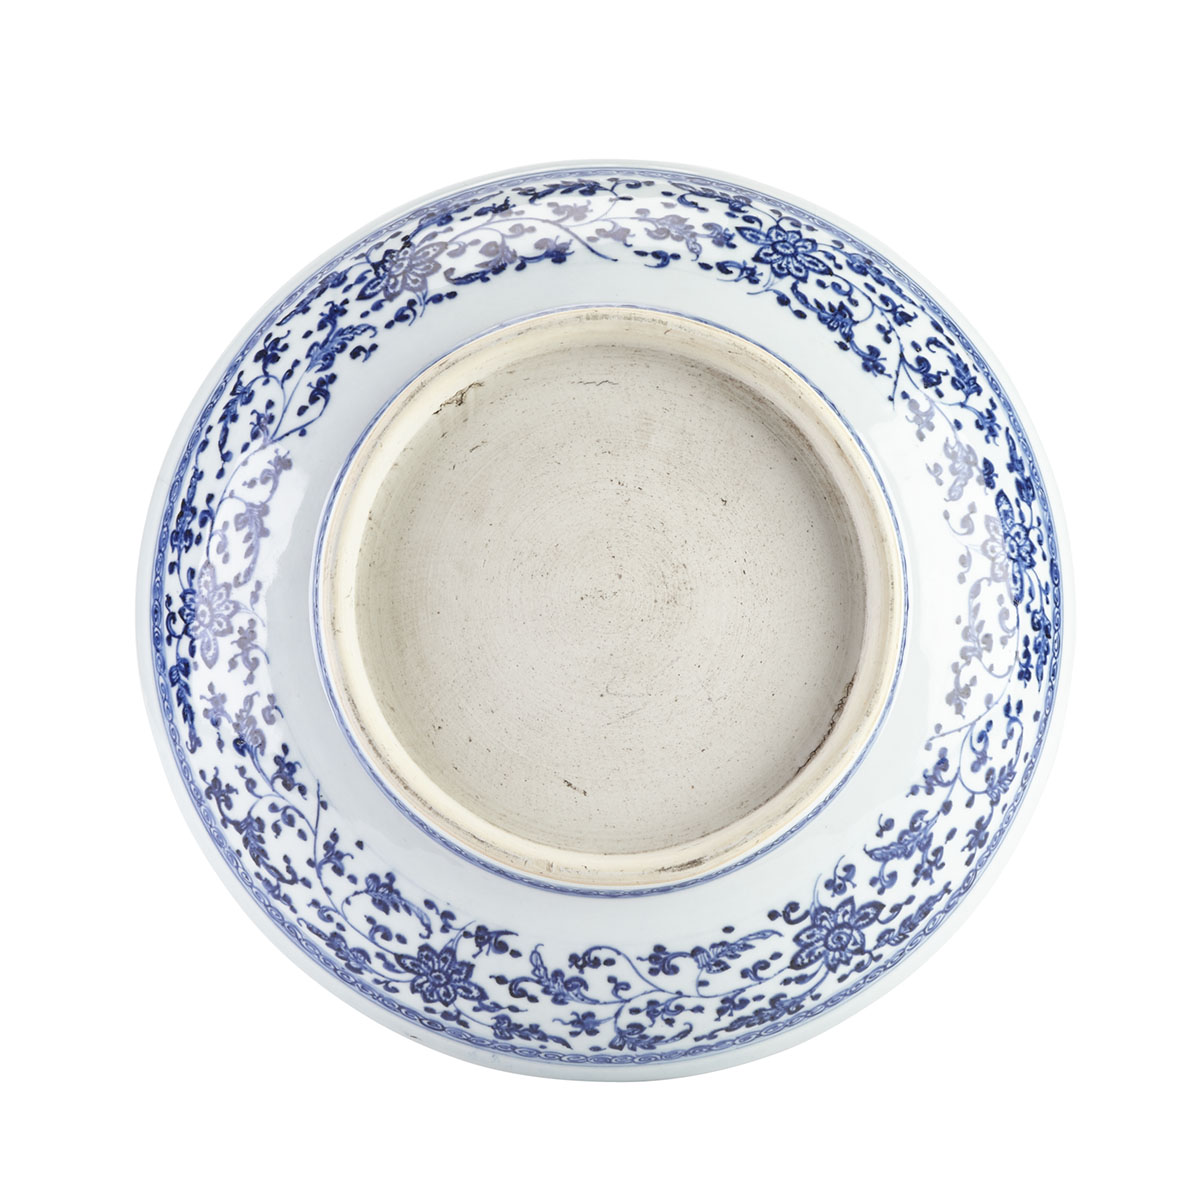 A Blue and White Ming-Style Dish, Qing Dynasty Qianlong to Daoguang Period, 18TH/19TH Century